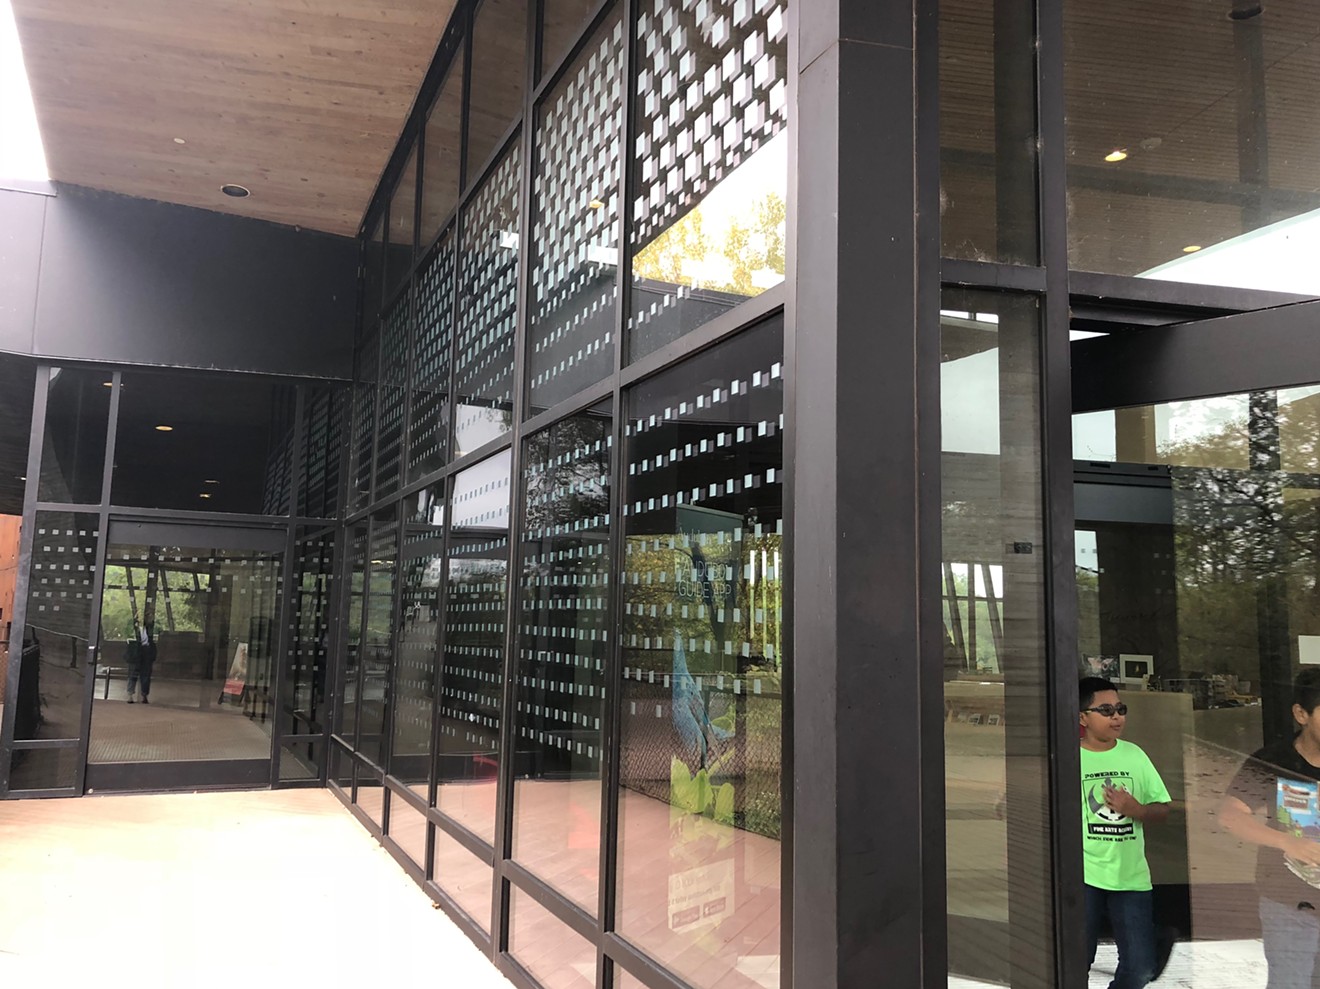 The Trinity River Audubon Center in Dallas has decorative decals on their windows so birds don't collide with them and die.